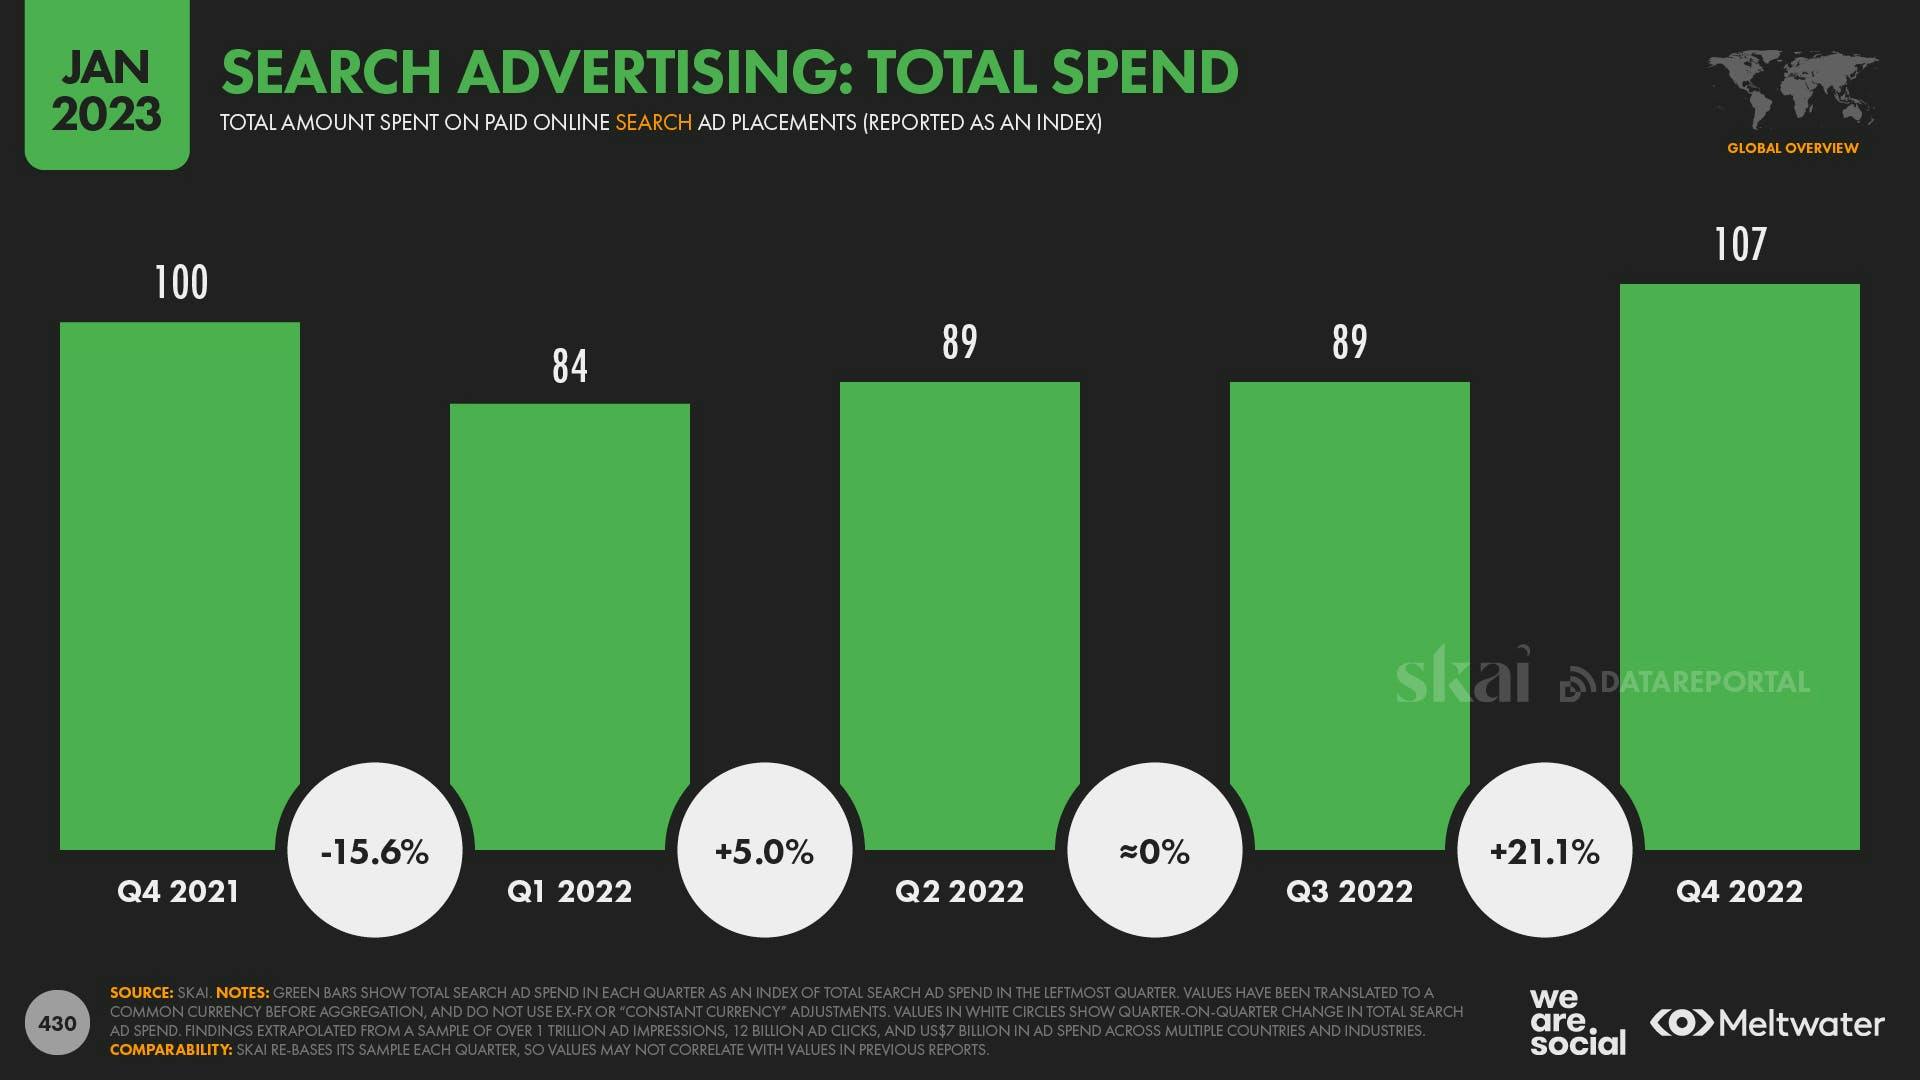 Search advertising: Total spend 2021- 2022